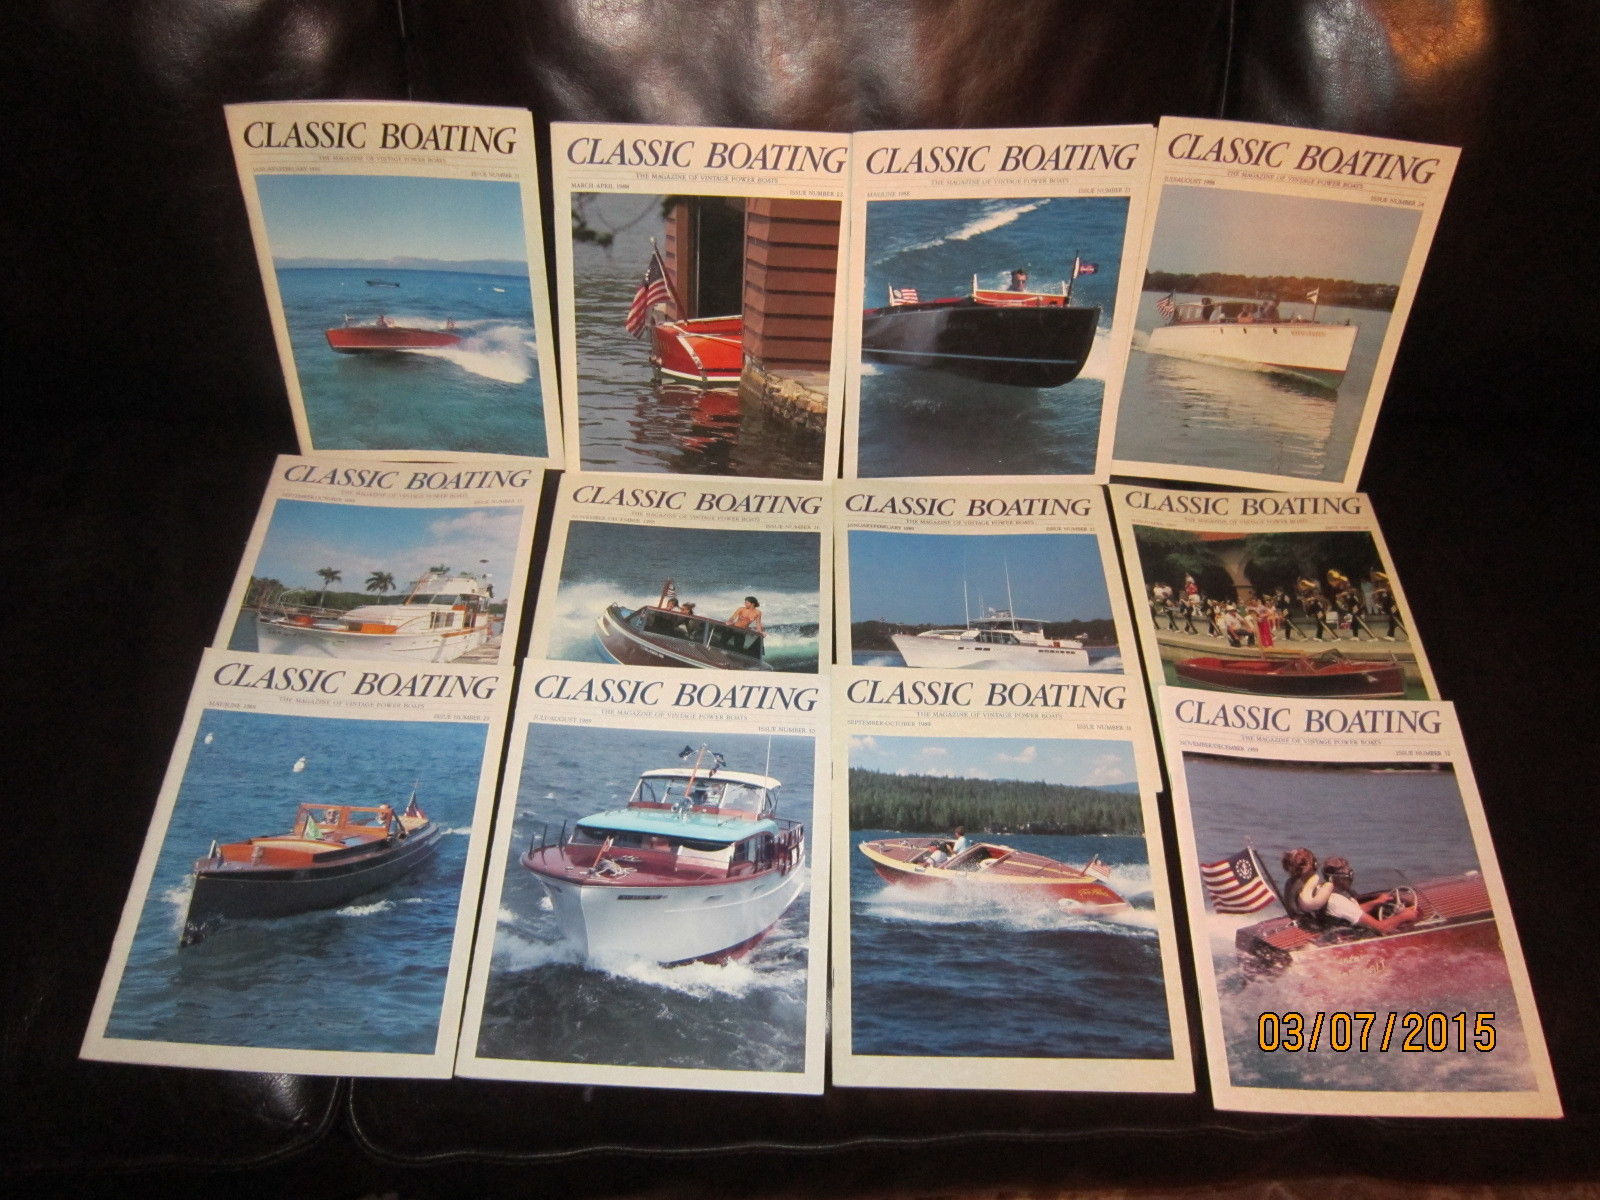 COMPLETE SET 1988-89 CLASSIC BOATING MAGAZINE 12 BACK ISSUES VINTAGE POWER BOAT